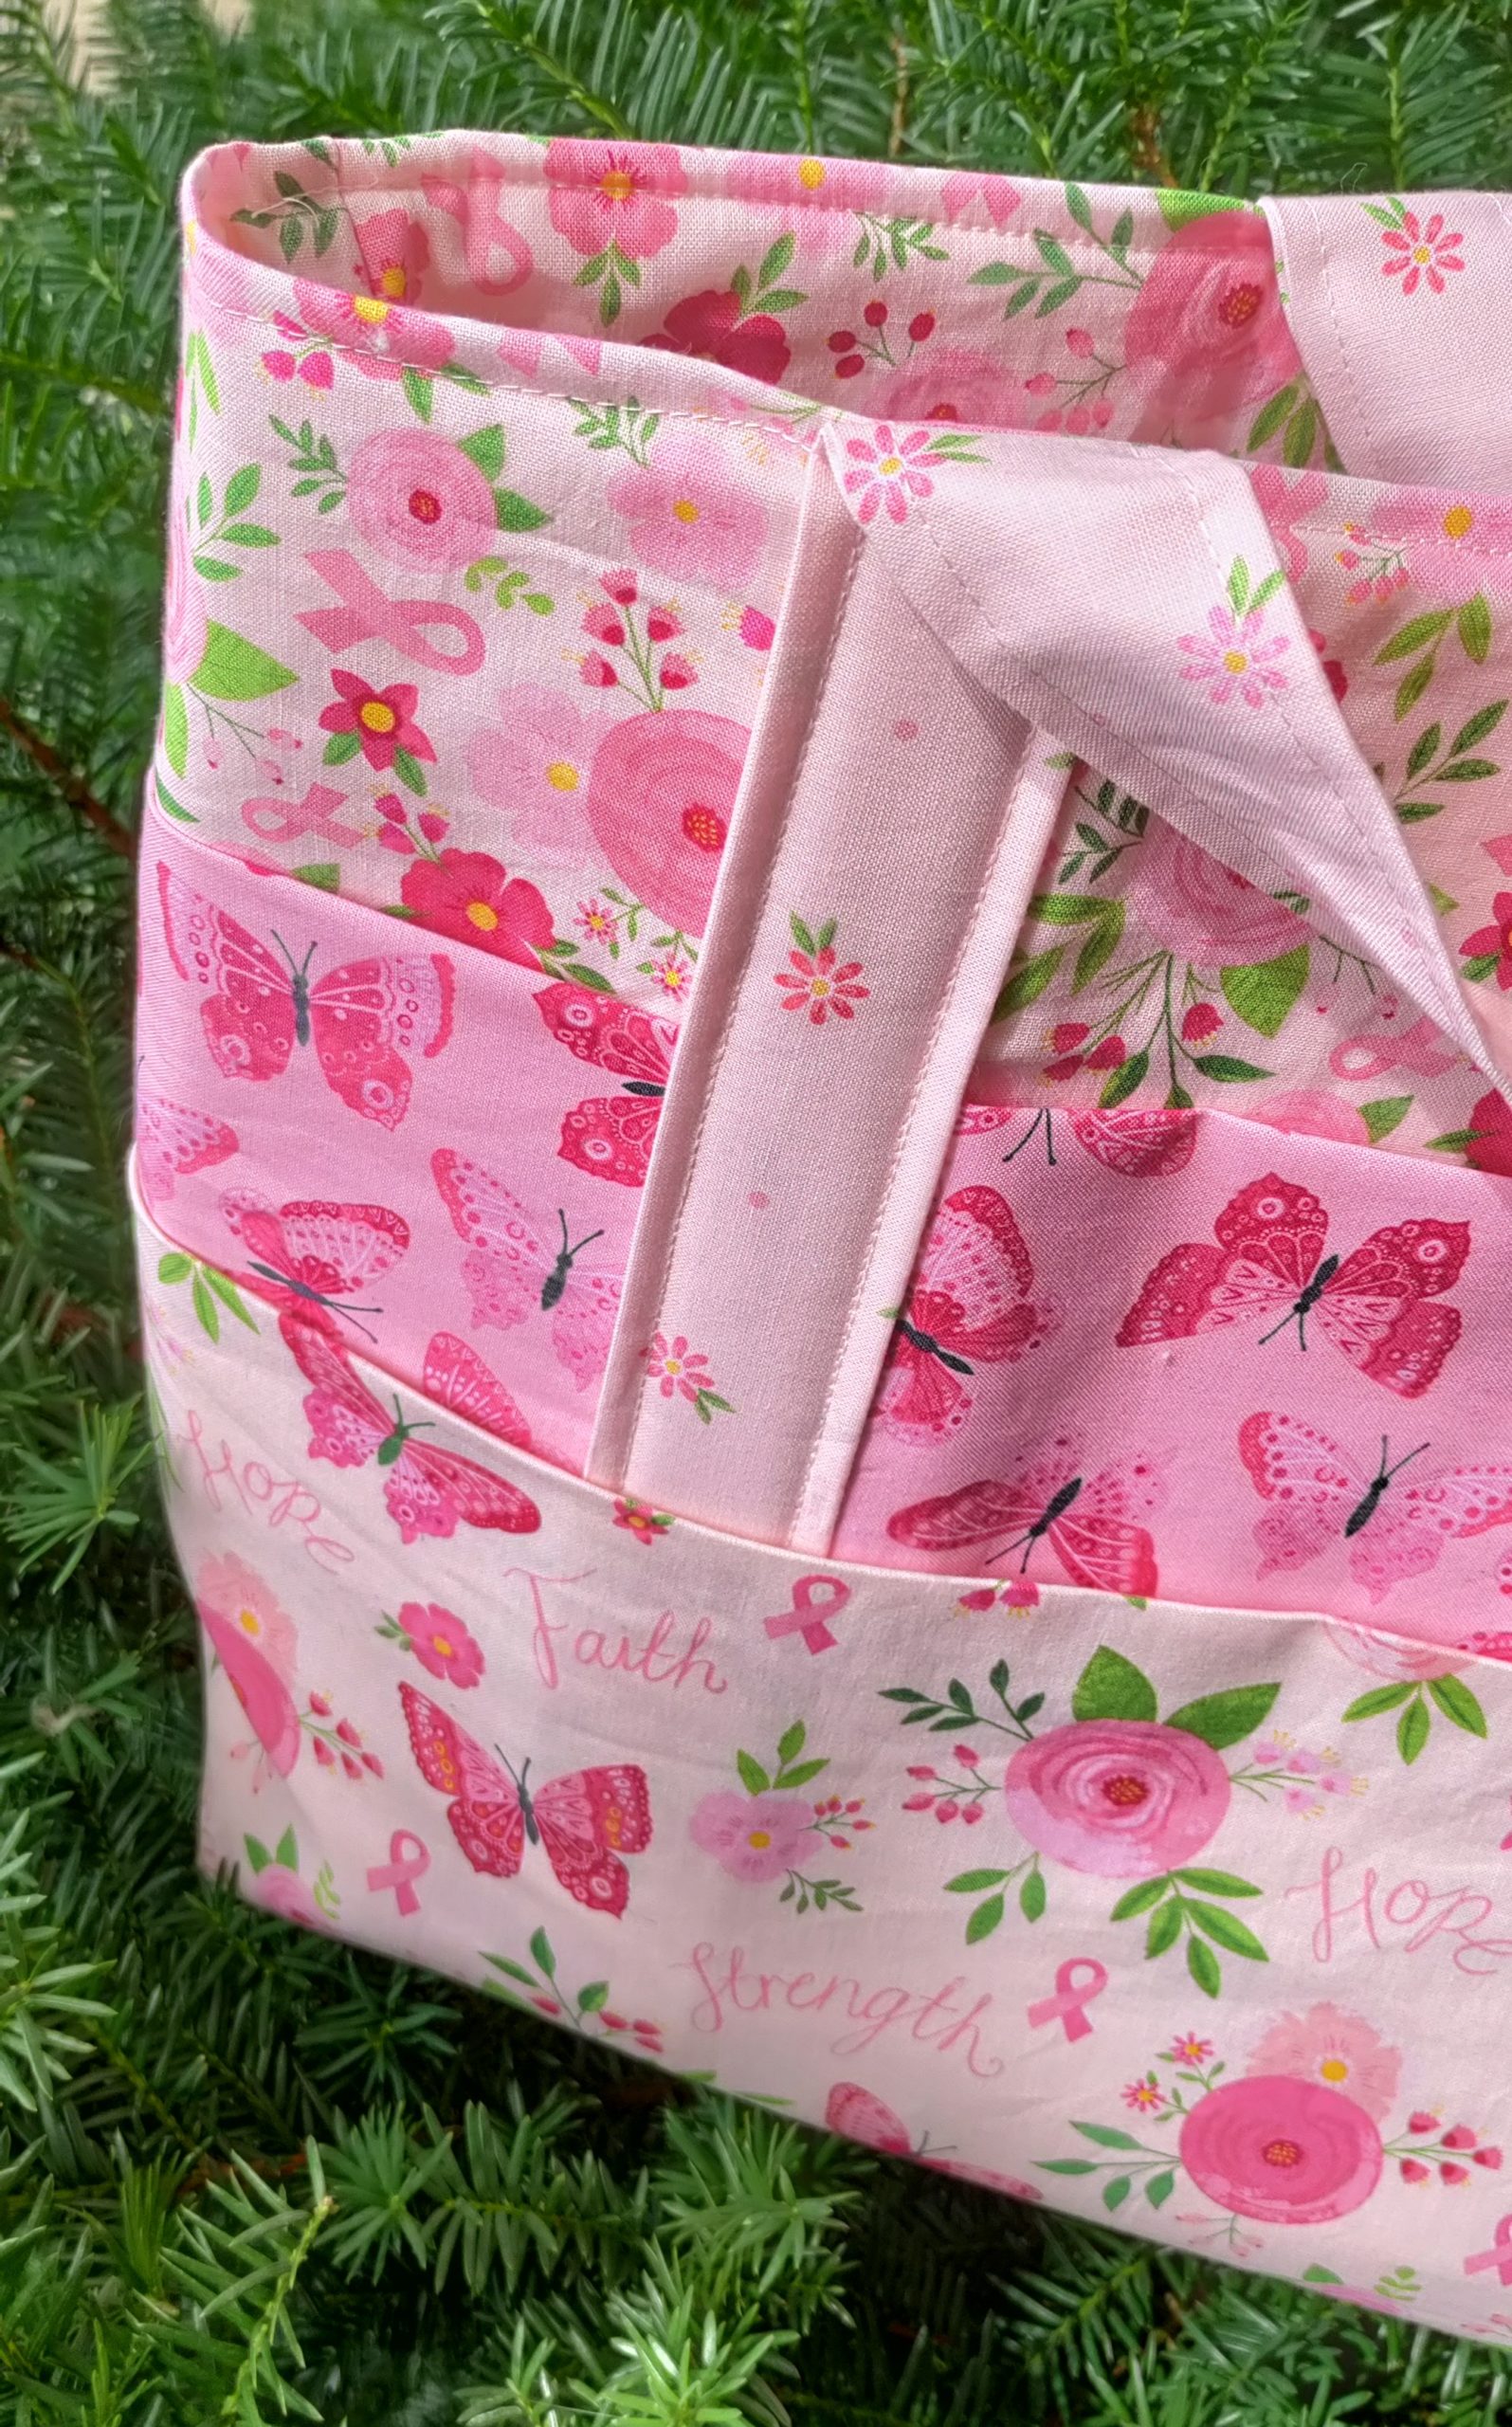 I used the Strength in Pink fabric collection, which features various shades of pink with butterflies, flowers, and breast cancer ribbons, to make a tote bag with several pockets on the outside.